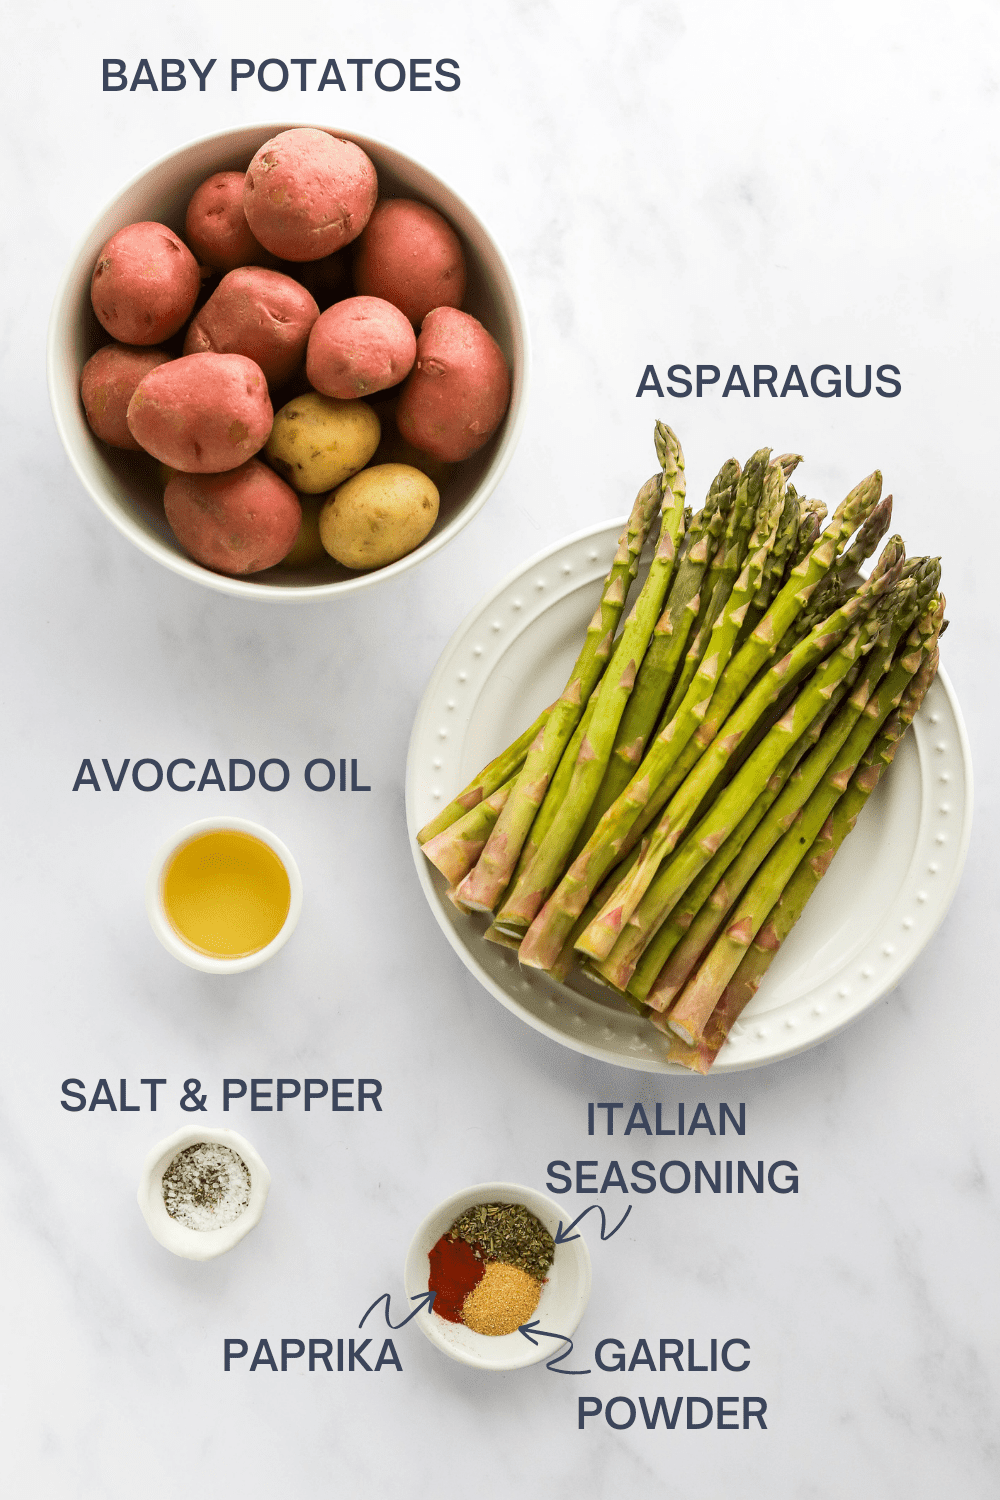 Bowl of red and gold potatoes with a bowl of asparagus, small bowl of oil, bowl of spices and a bowl of salt and pepper in front of it. 